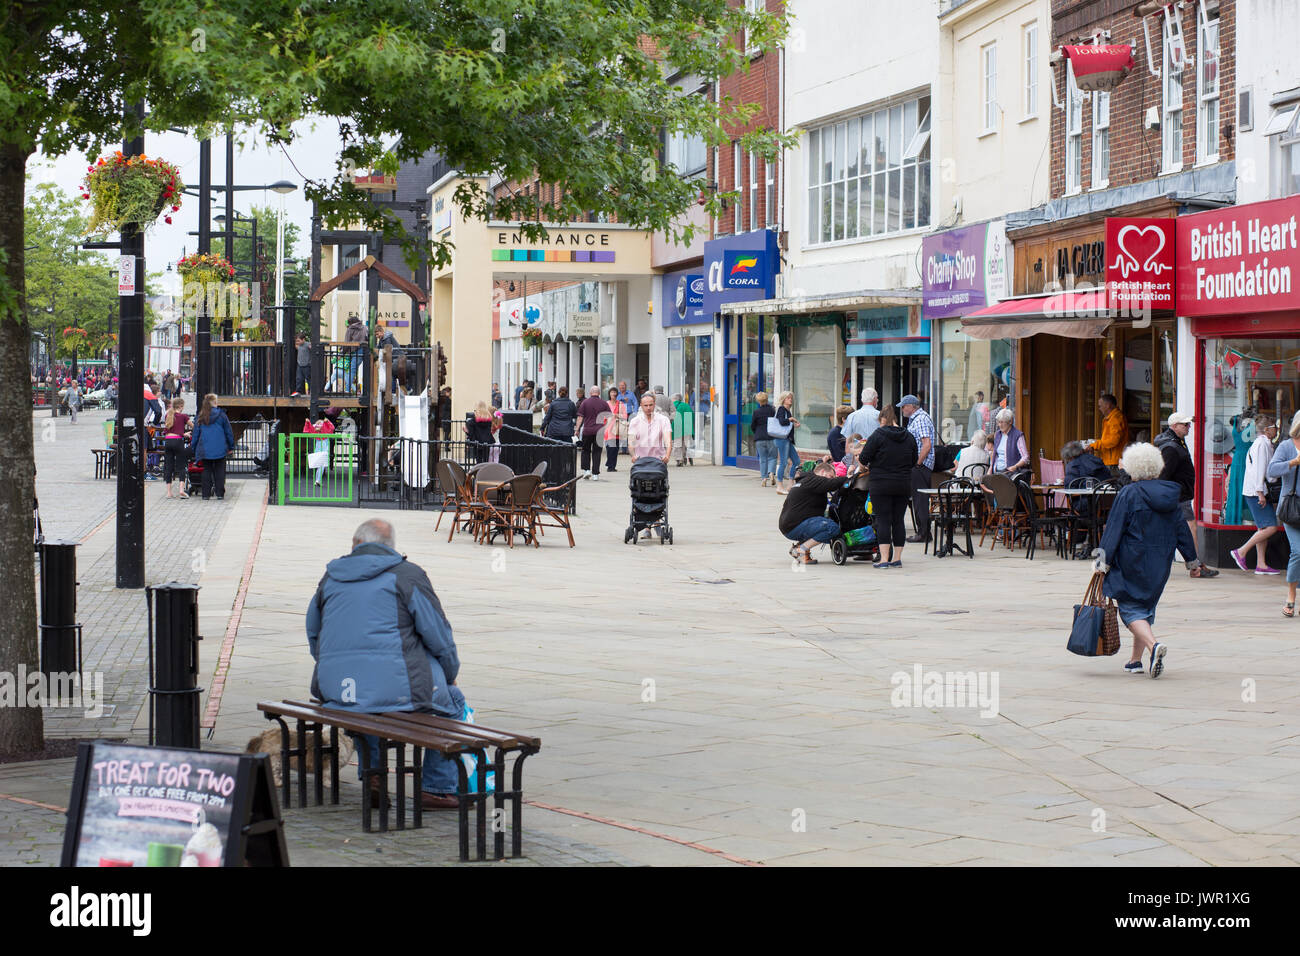 Fareham, a small market town in Hampshire. The photo shows the pedestrianised West Street, the town's main shopping road. Stock Photo